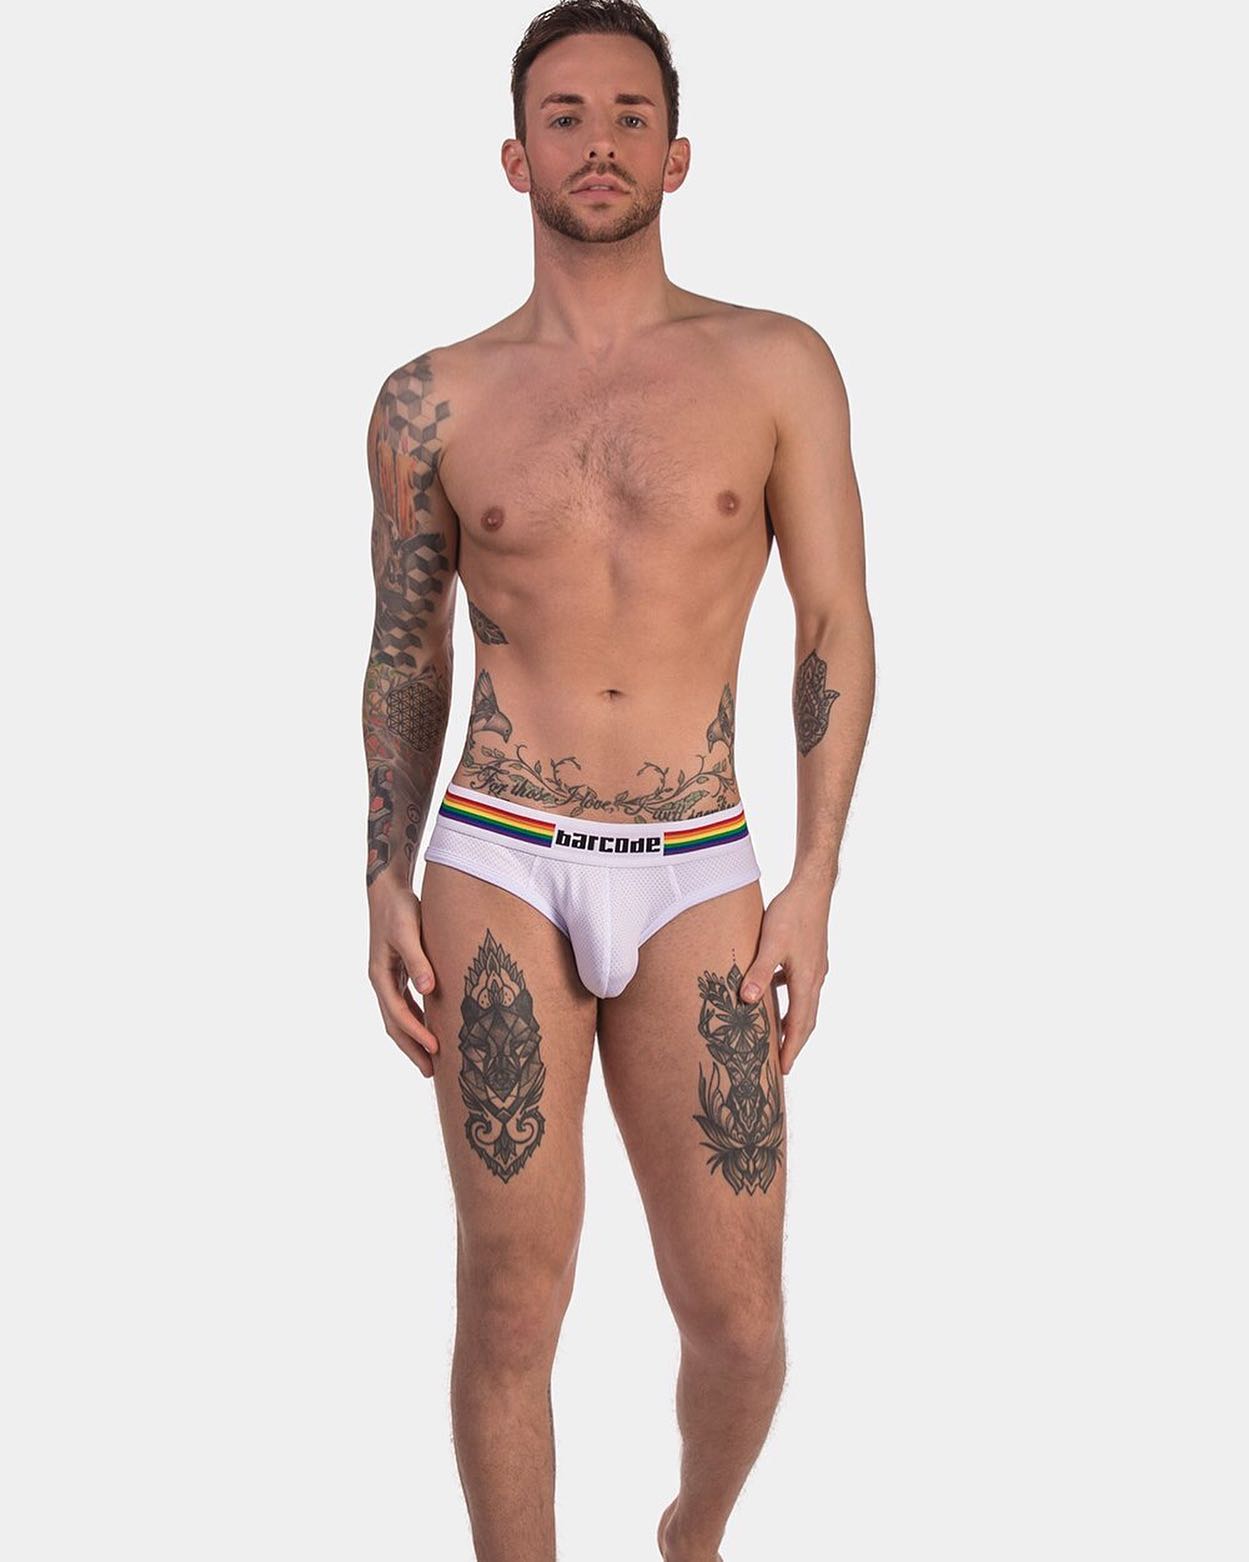 Back in stock today, the Pride Briefs in white by Barcode Berlin! Perforated fabric, unlined and super fun! Check it out:
_____
https://menandunderwear.com/shop/underwear/barcode-berlin-pride-briefs-white